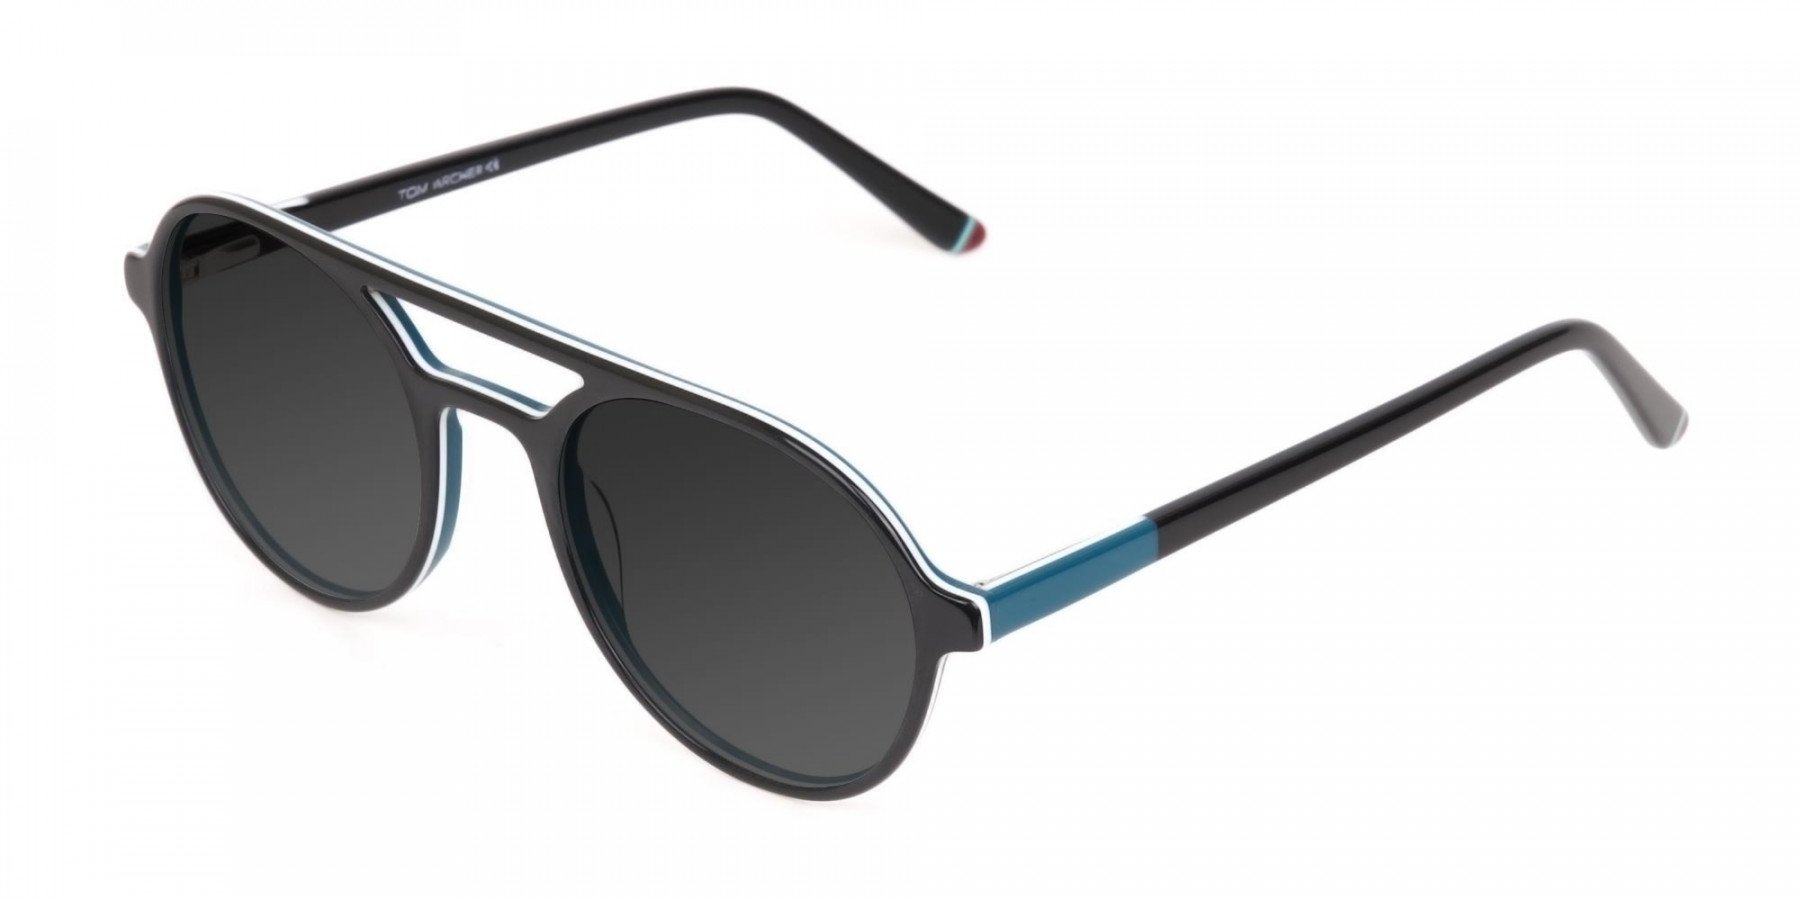 Black and Turquoise Sunglasses - 1